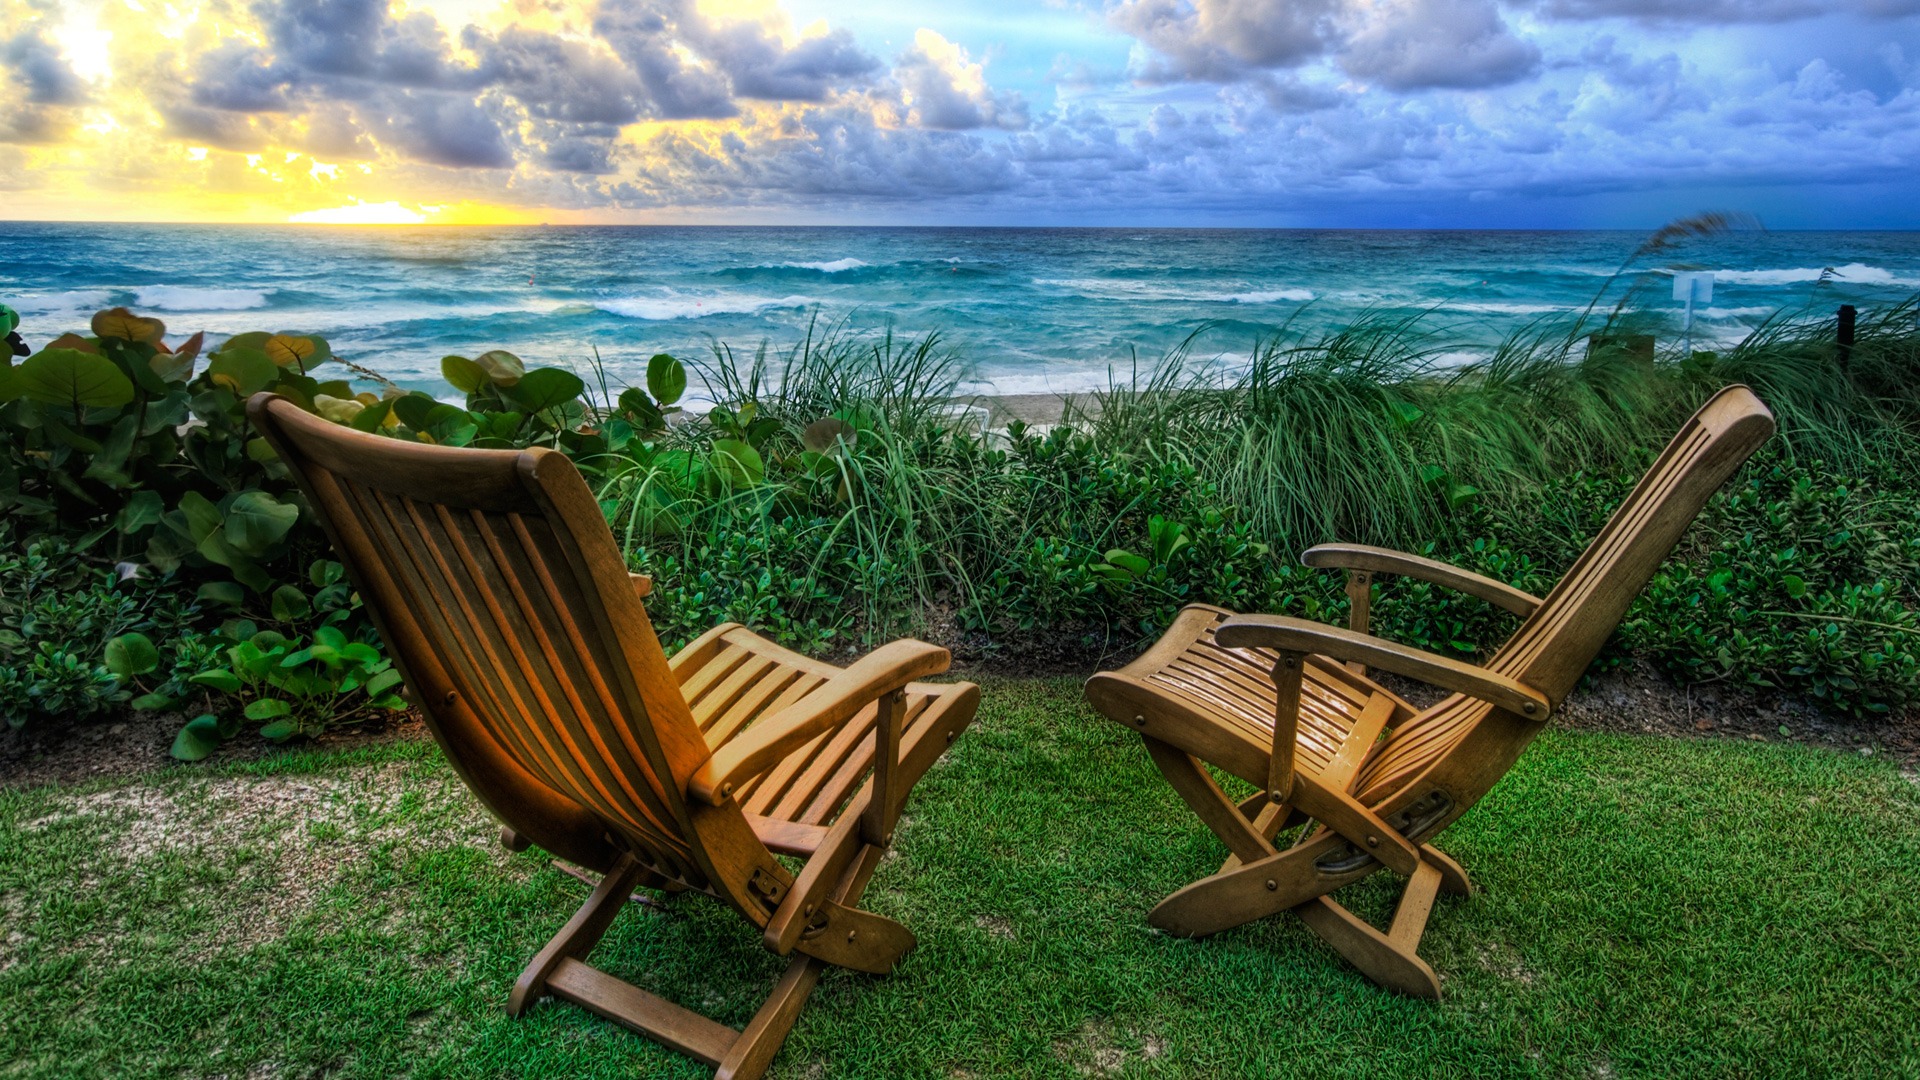 Landscape Of Chairs - HD Wallpaper 